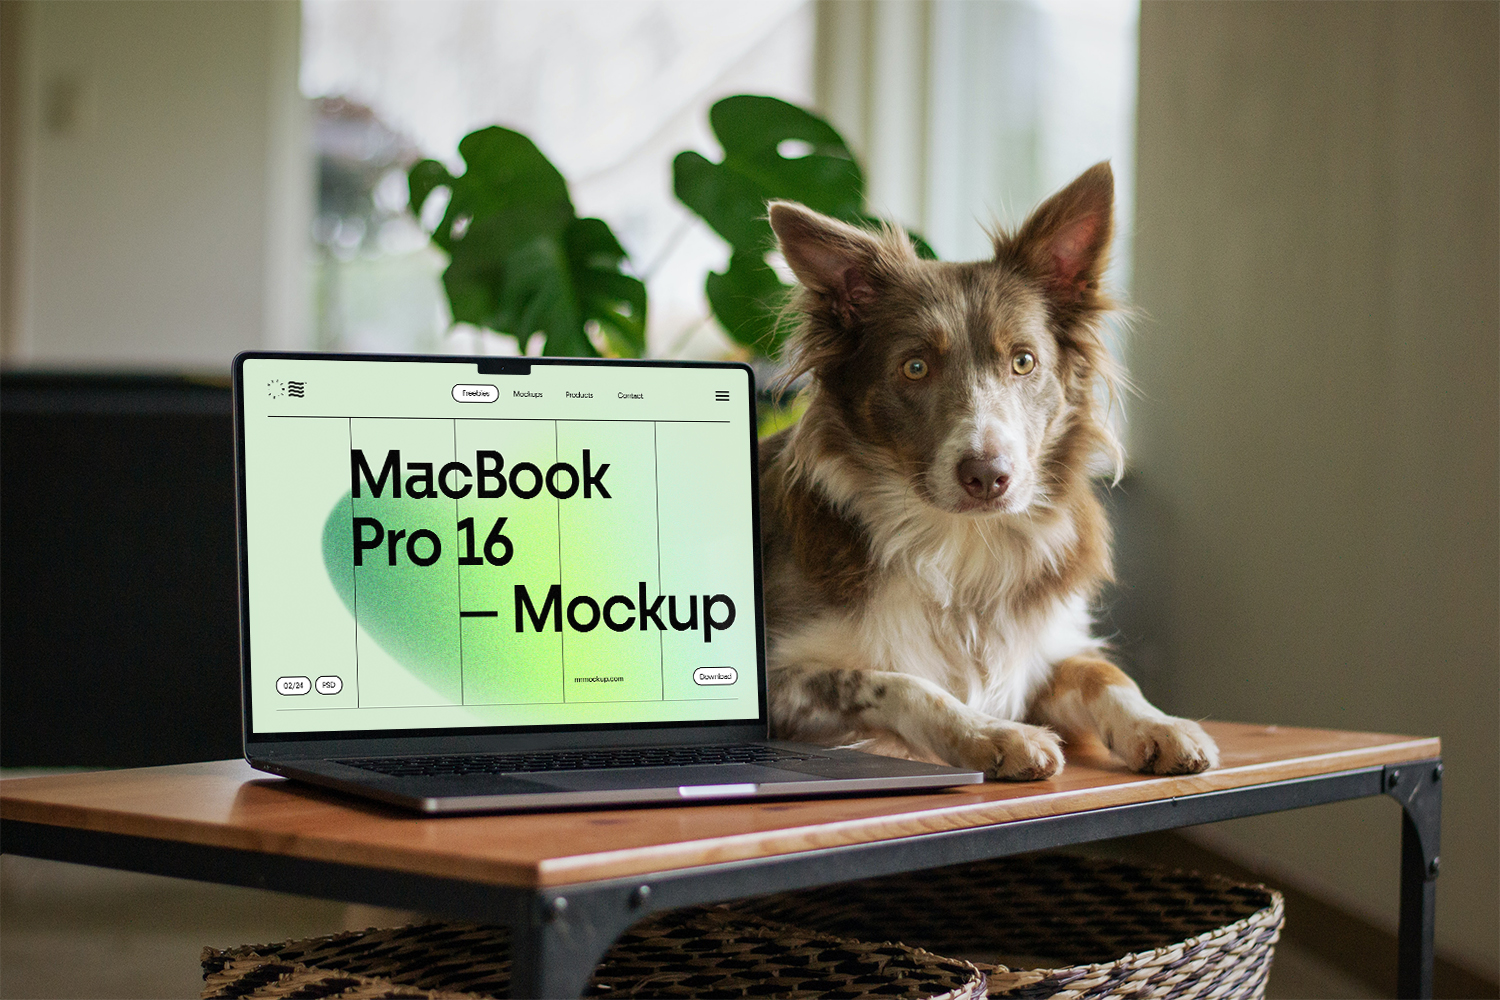 MacBook Pro with Doggy on Table Free Mockup